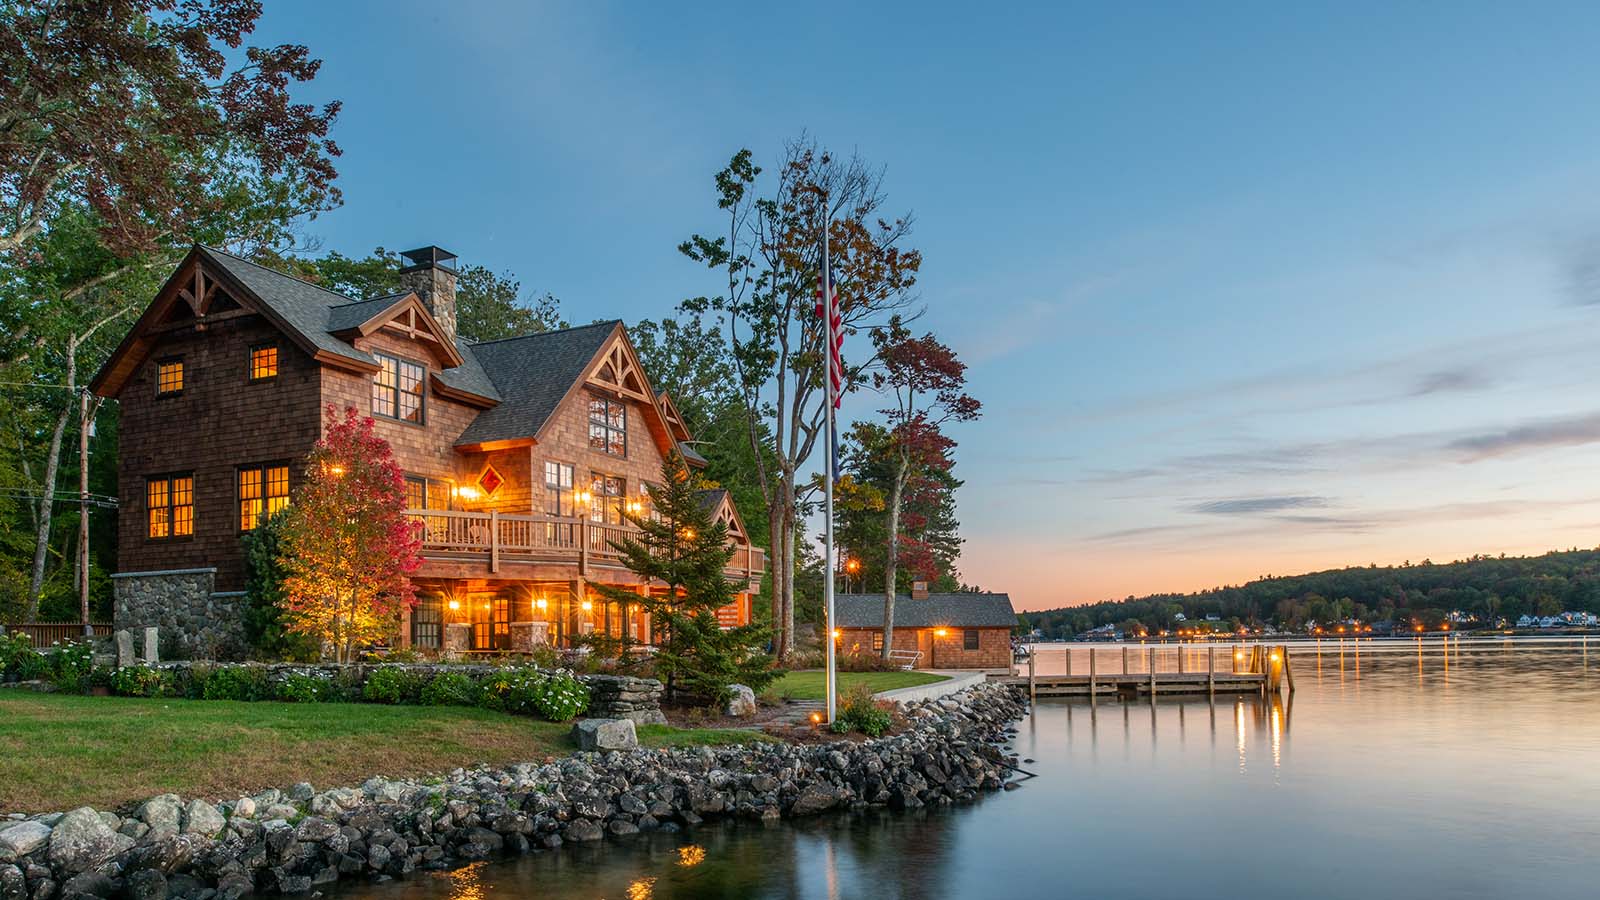 Exterior view of the back of a timber framed waterfront retreat sitting on the shore of Lake Winnipesaukee.